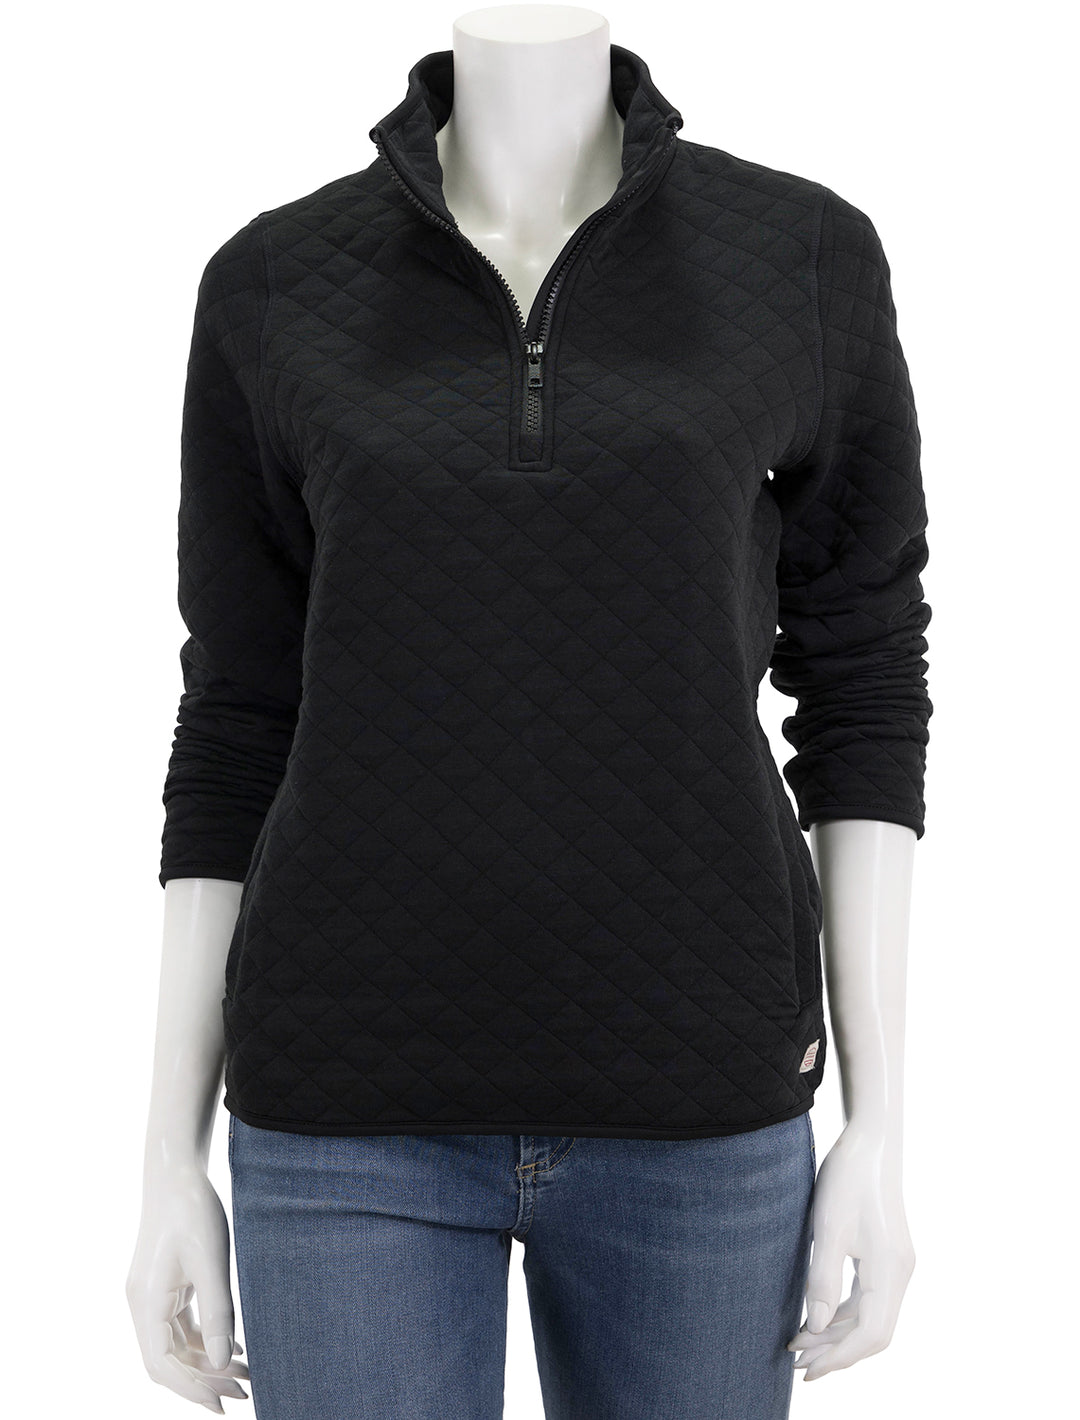 Front view of Marine Layer's corbet quilted pullover in black heather.